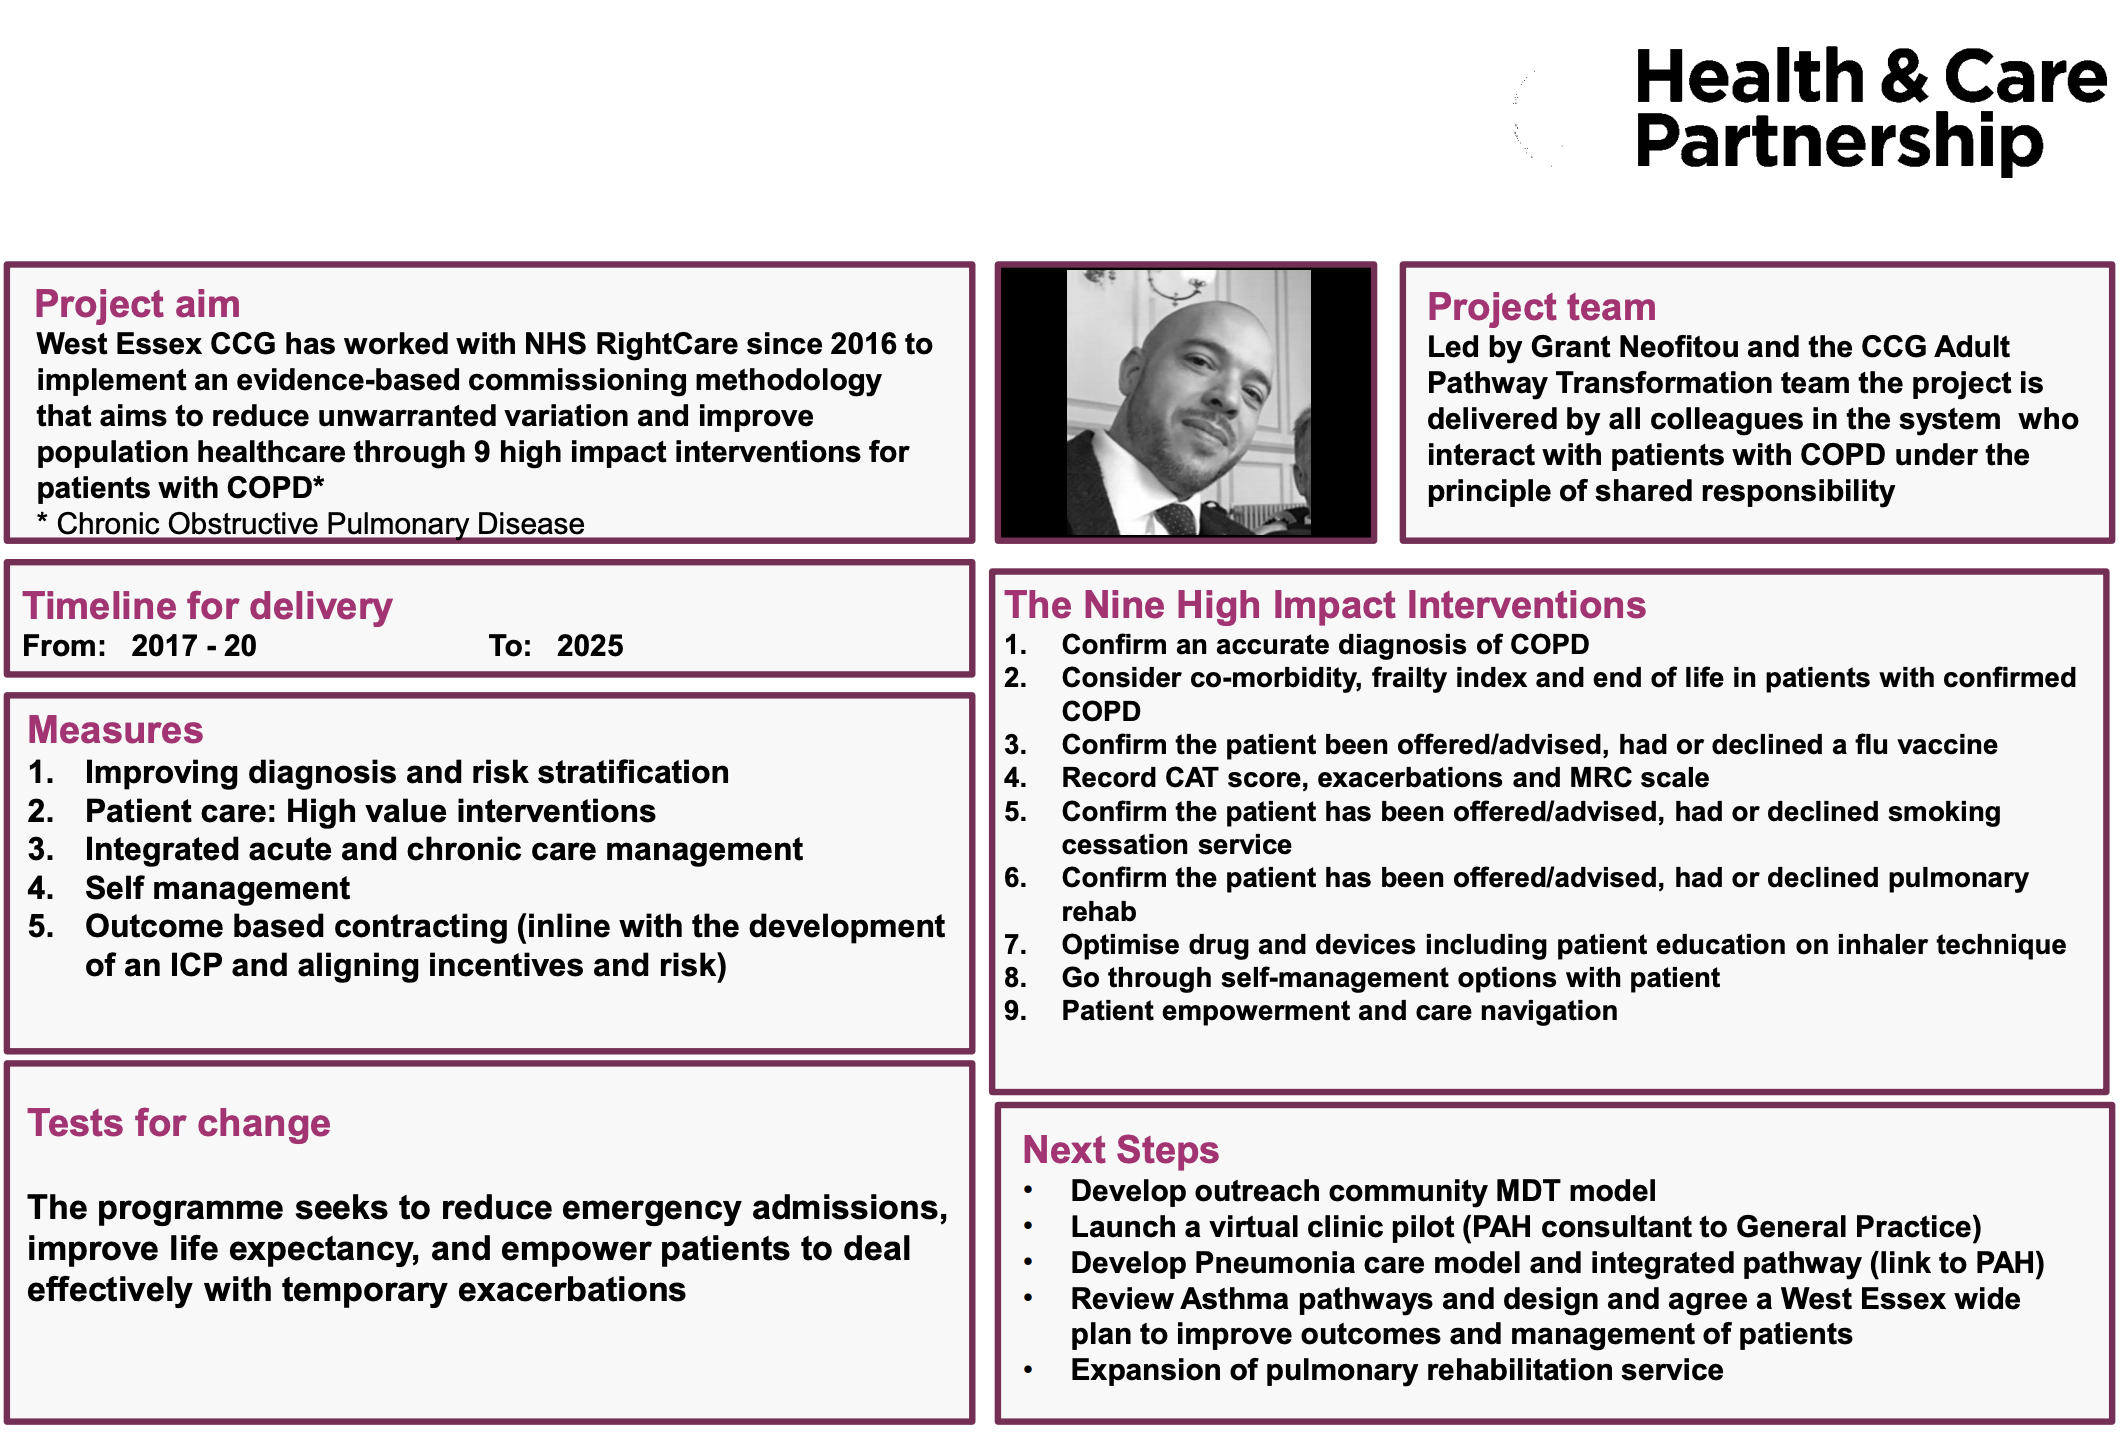 West Essex One Health & Care Partnership - Respiratory - @QualityFirstPAH featured image